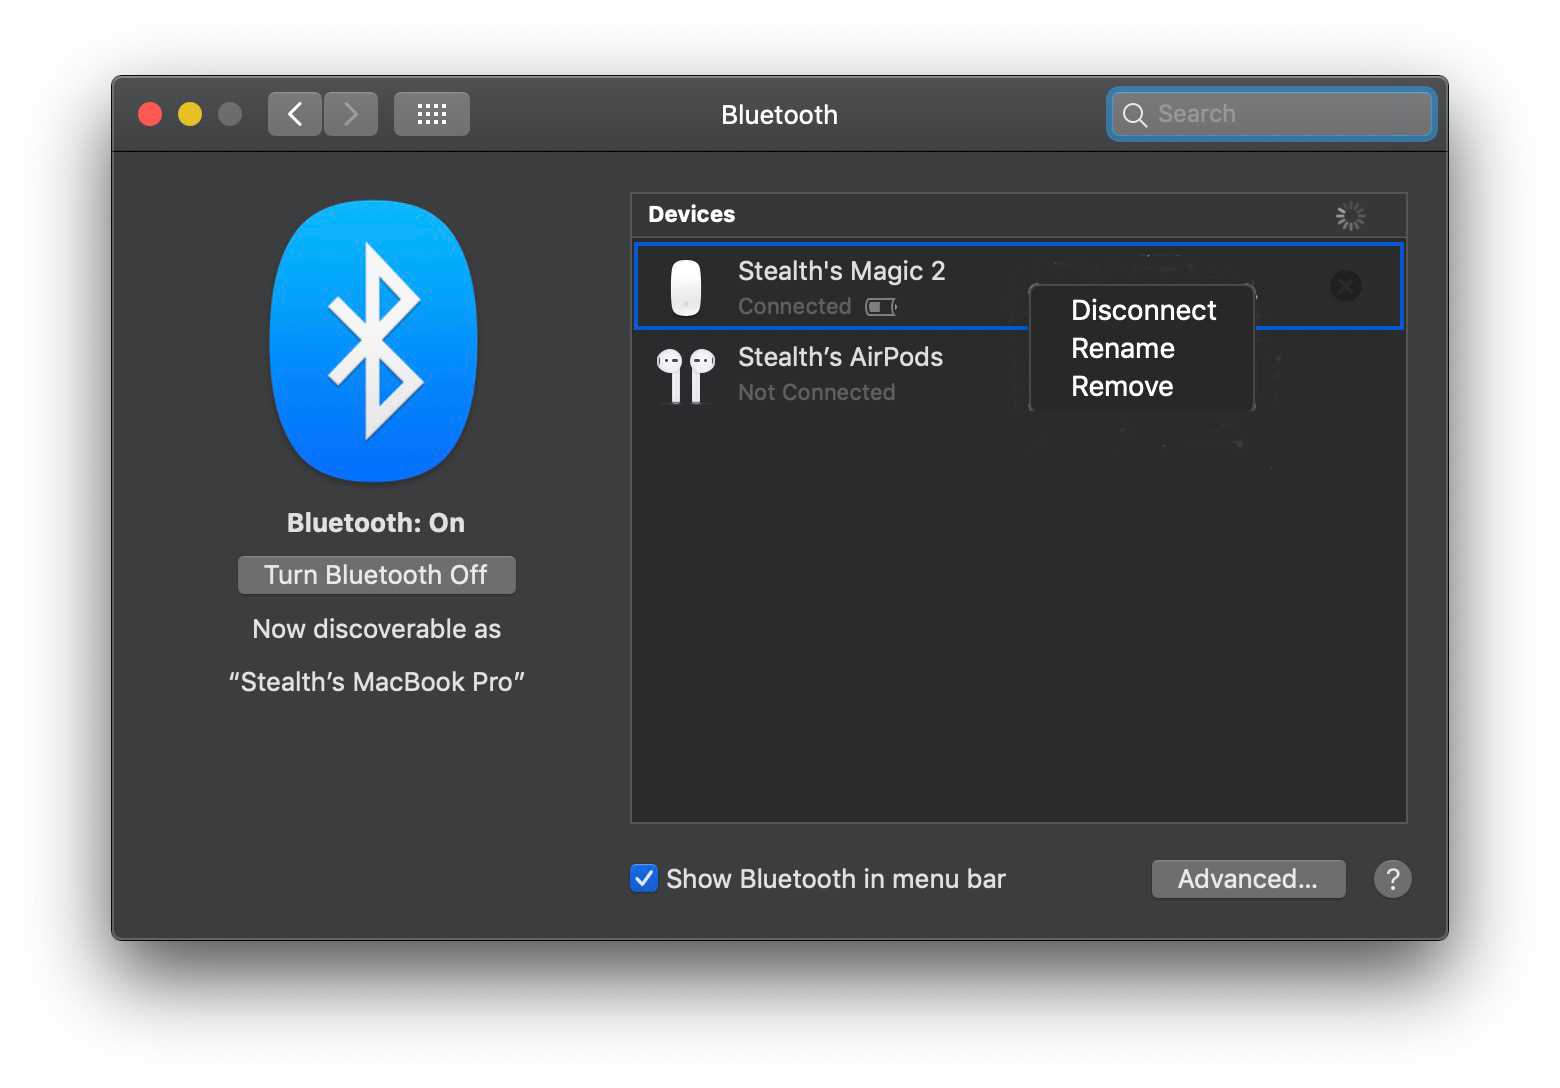 How Do We Change The Name Of A Bluetooth Device Apple Magic Mouse In Windows 7 8 8 1 Or Windows 10 Rename Bluetooth Device Stealth Settings